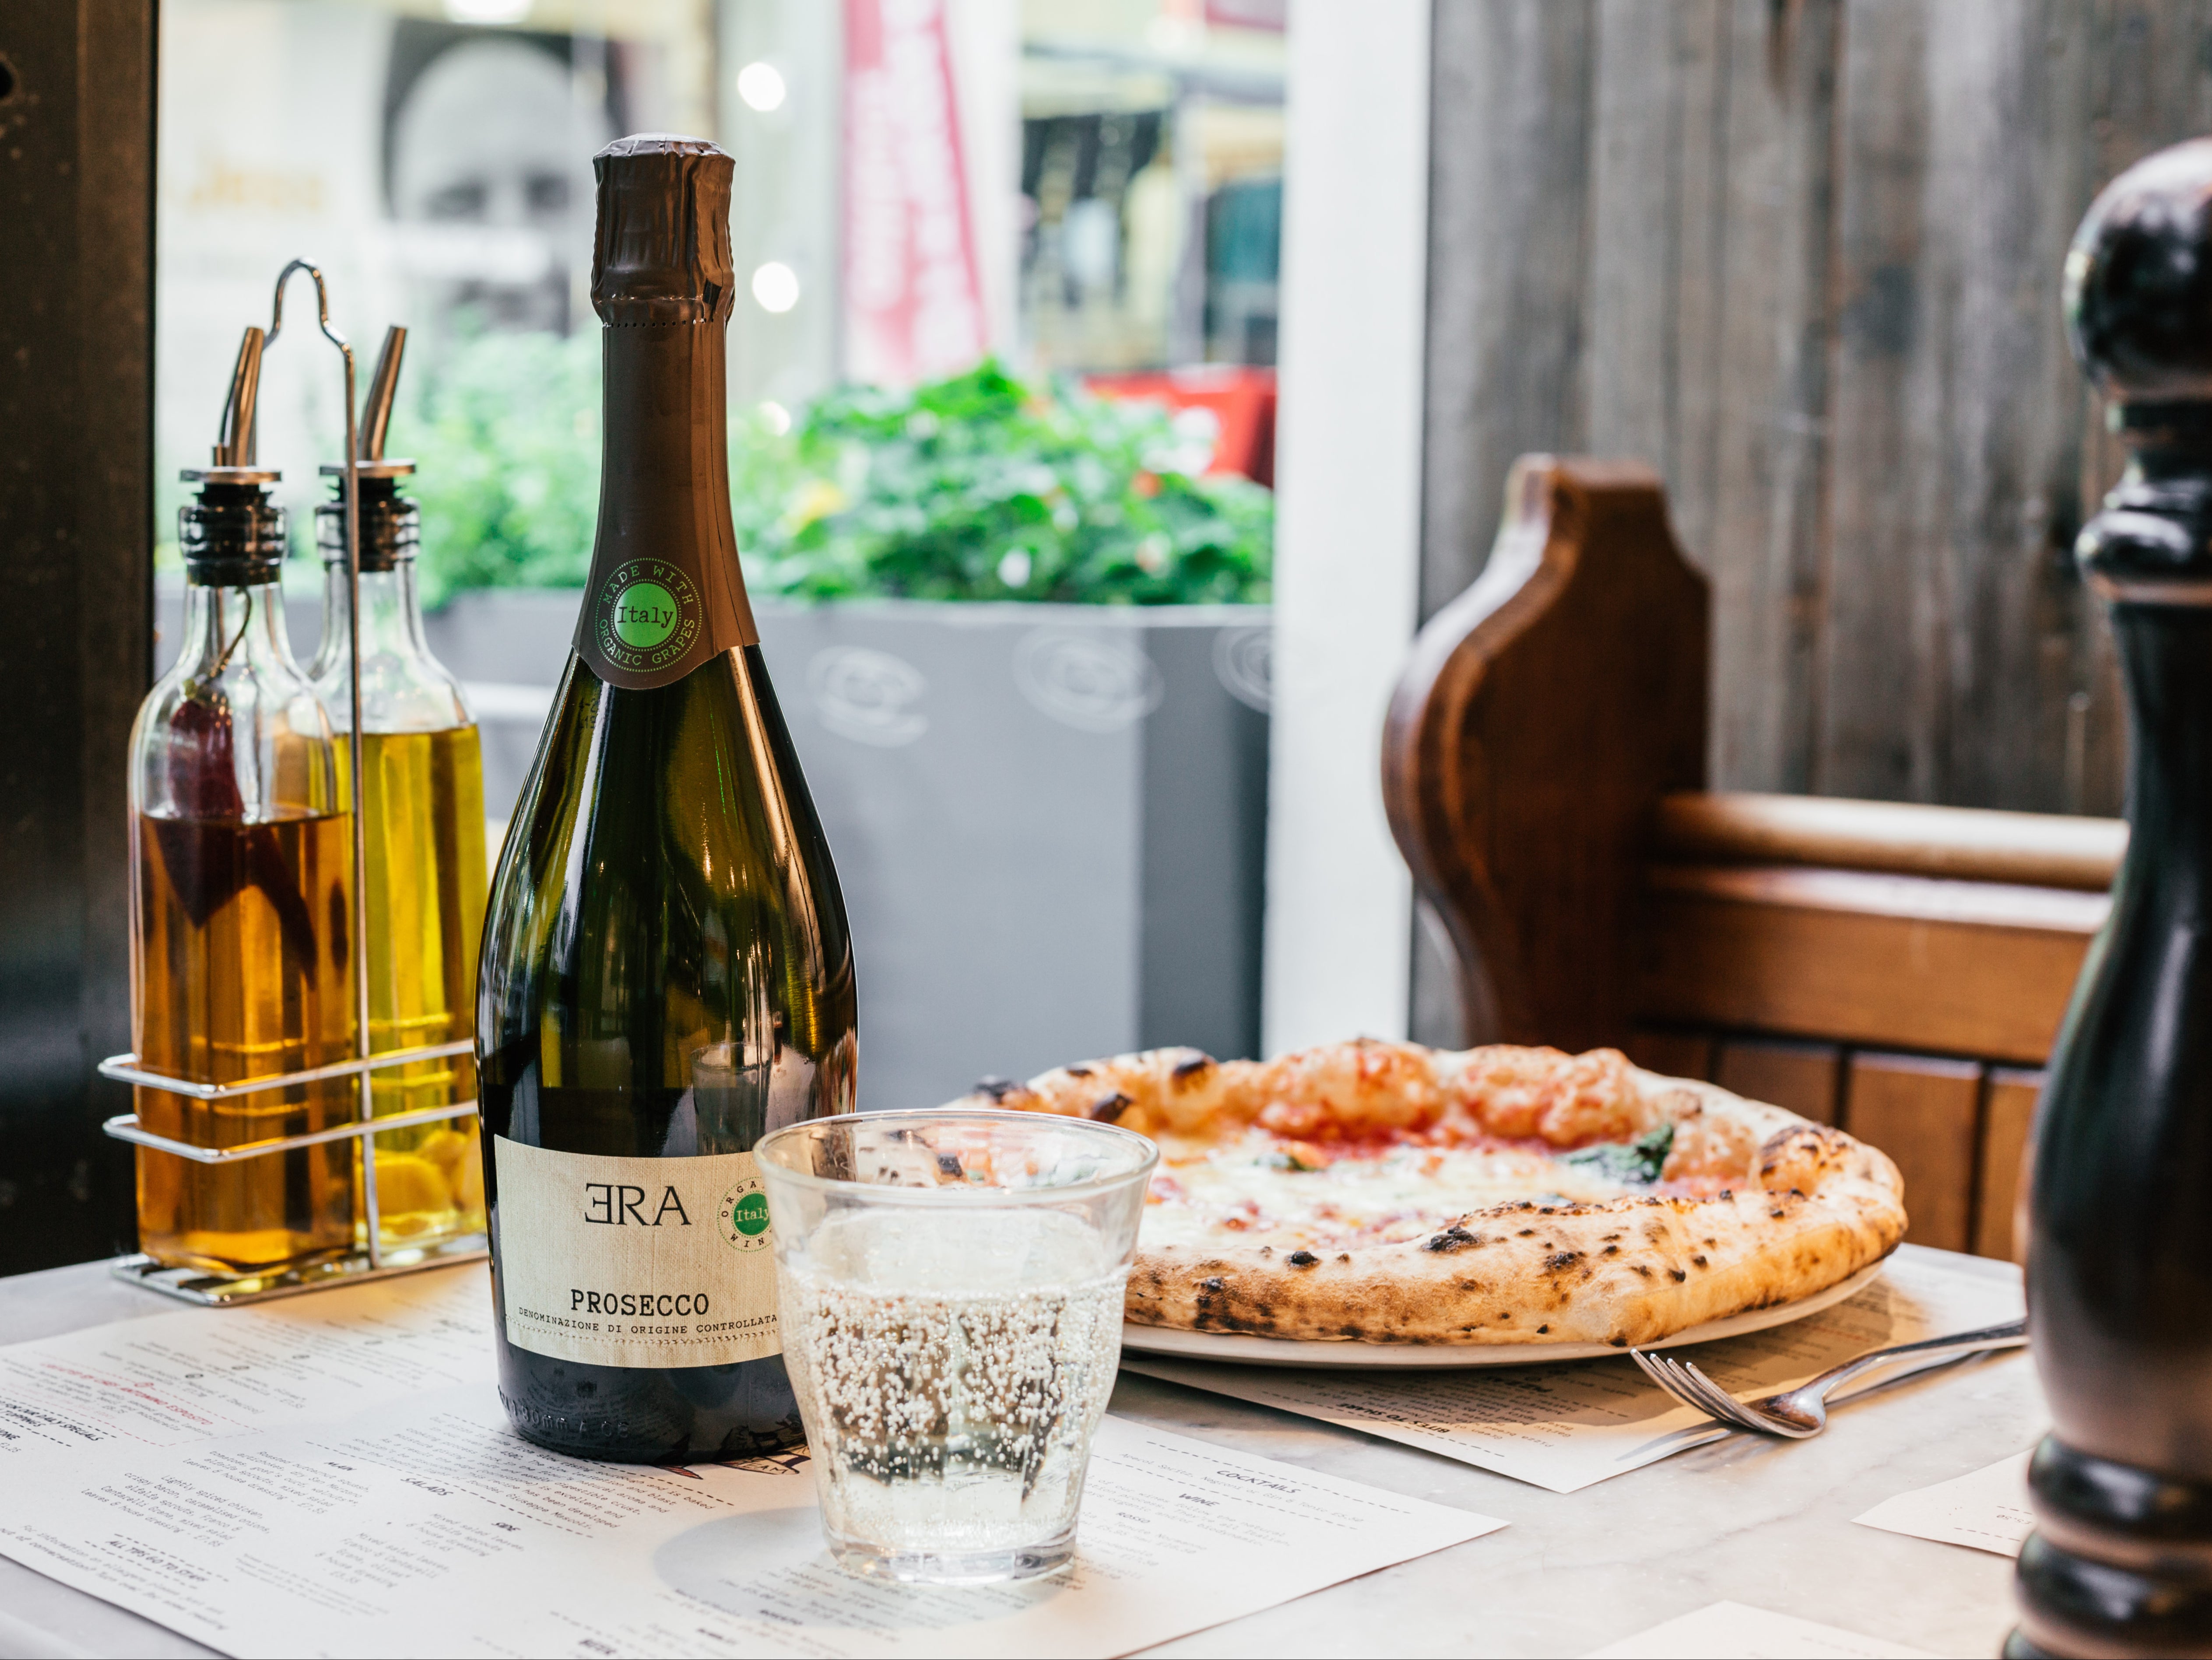 Franco Manca is offering a free glass of prosecco with any order of its special Jubilee pizzas